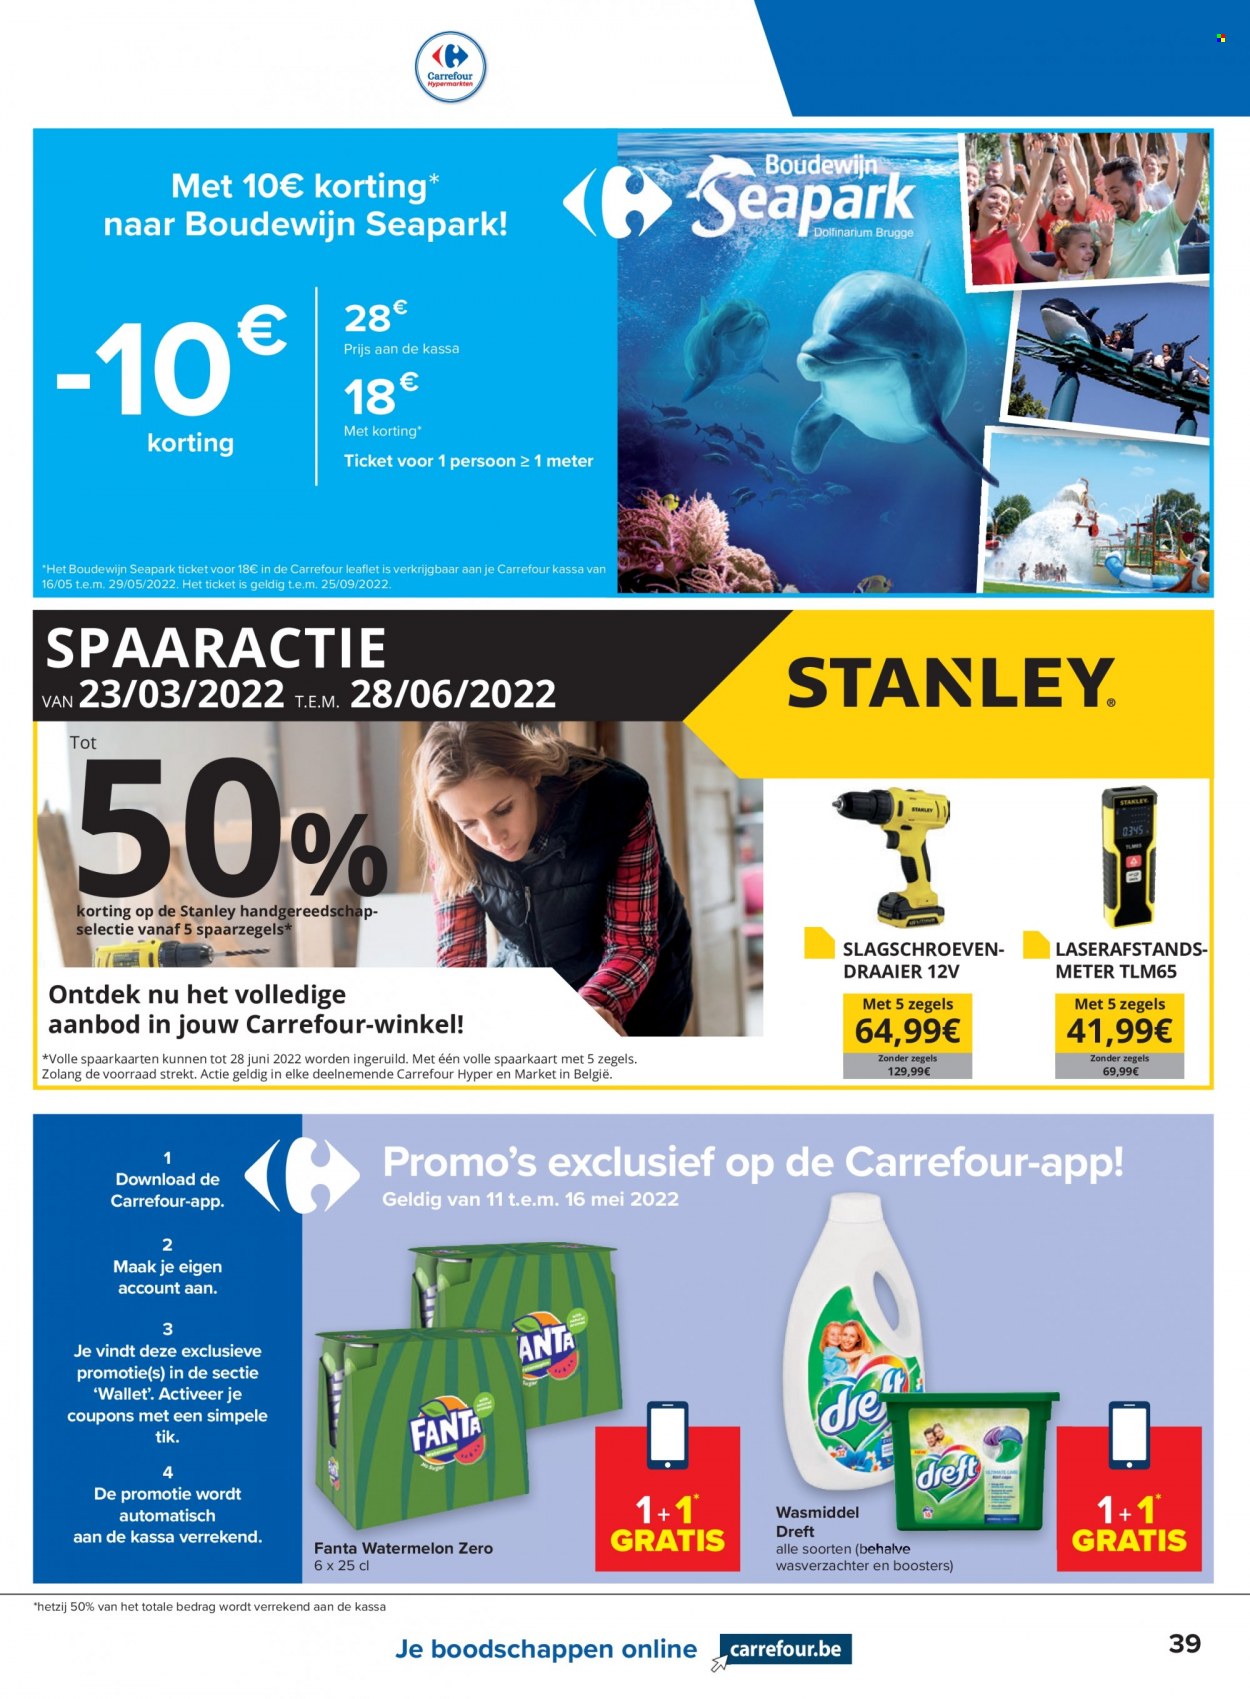 Catalogue Carrefour hypermarkt - 24.5.2022 - 30.5.2022. Page 39.